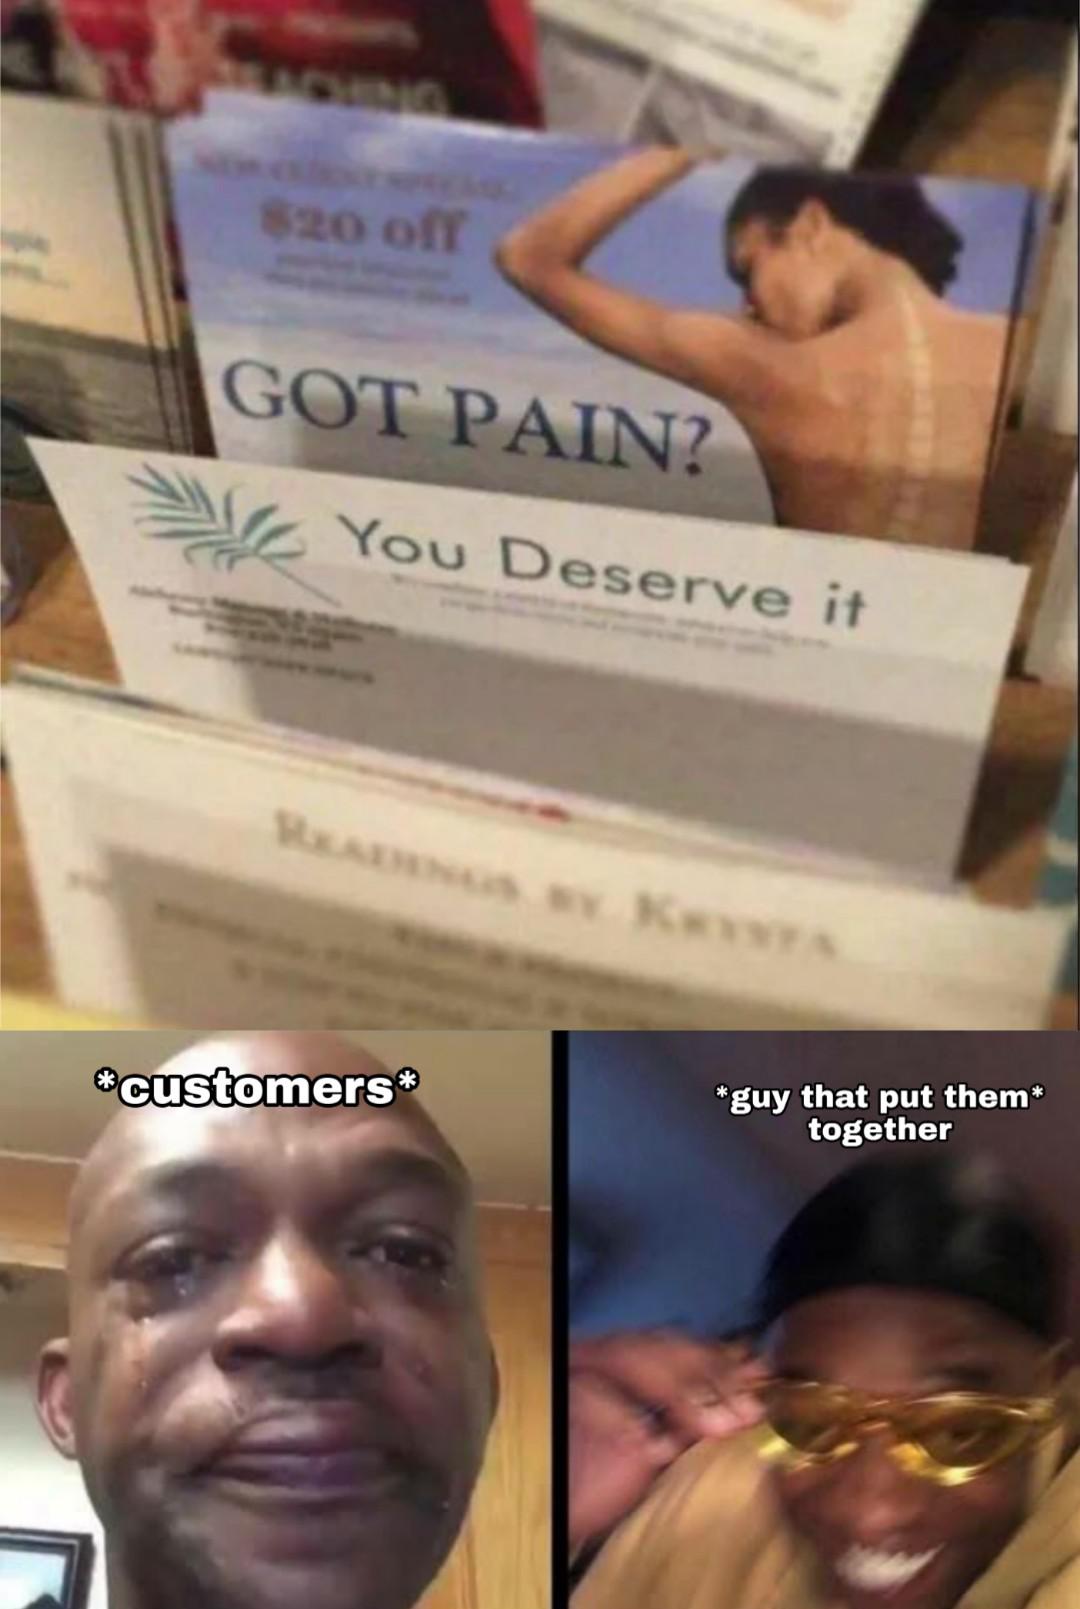 got pain you deserve - $20 of Got Pain? You Deserve it customers guy that put them together